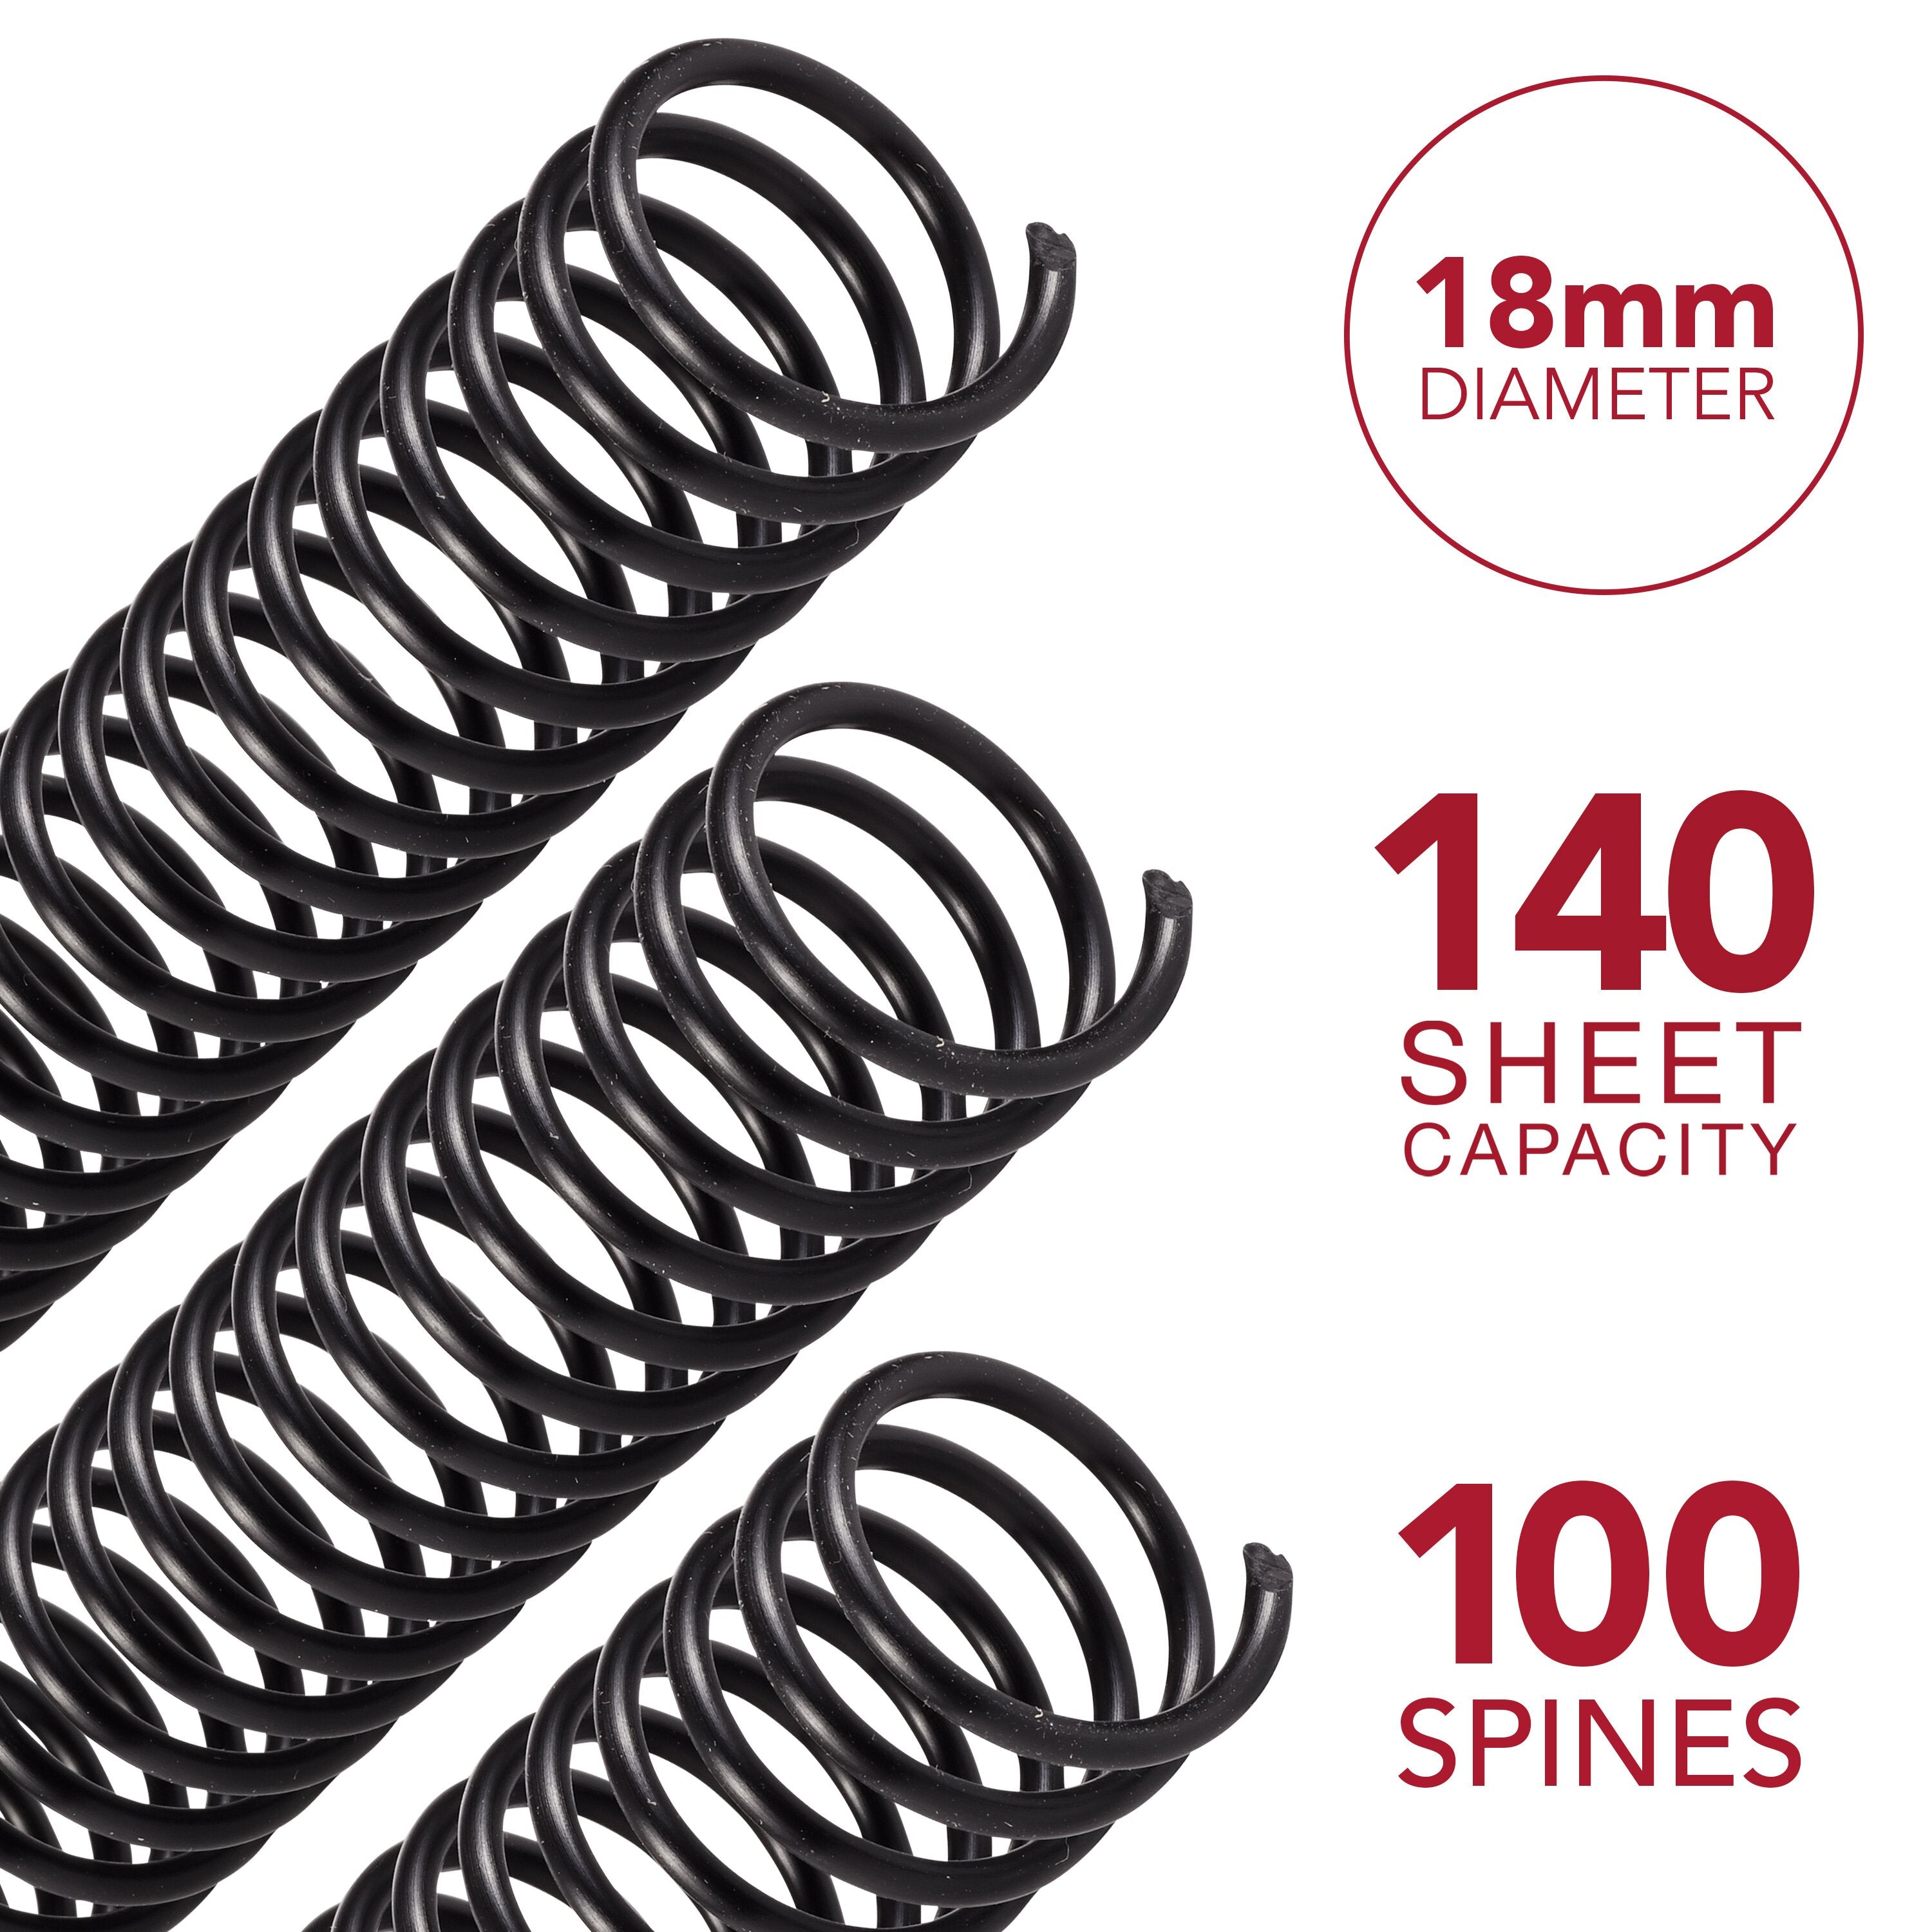 GBC Color Coil Binding Spines, 18mm, Black, 100 Pack - Professional Binding Solution